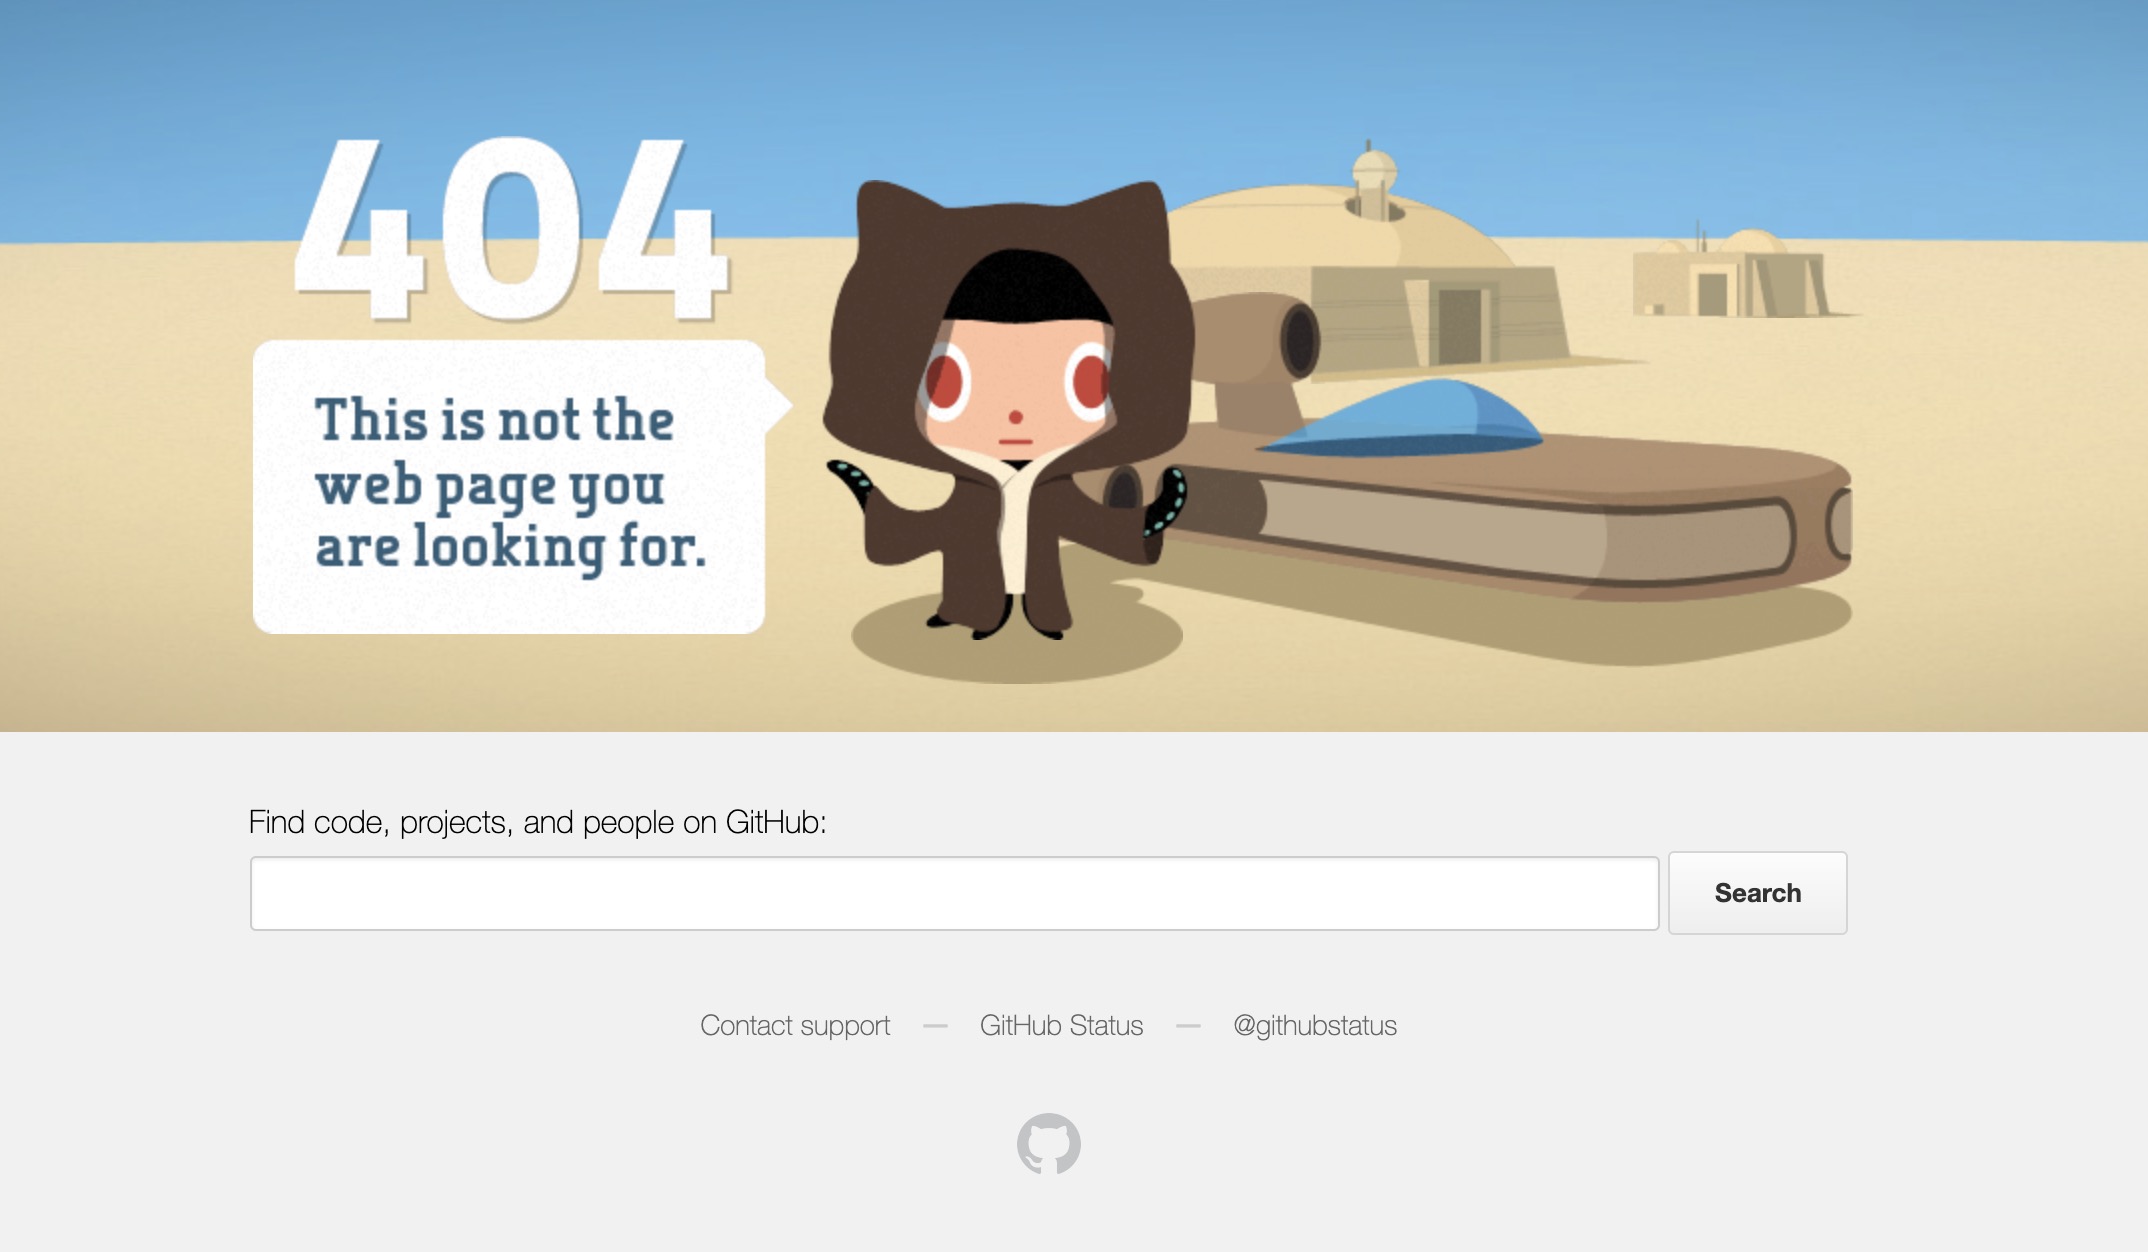 A friendly 404 by GitHub and a search bar